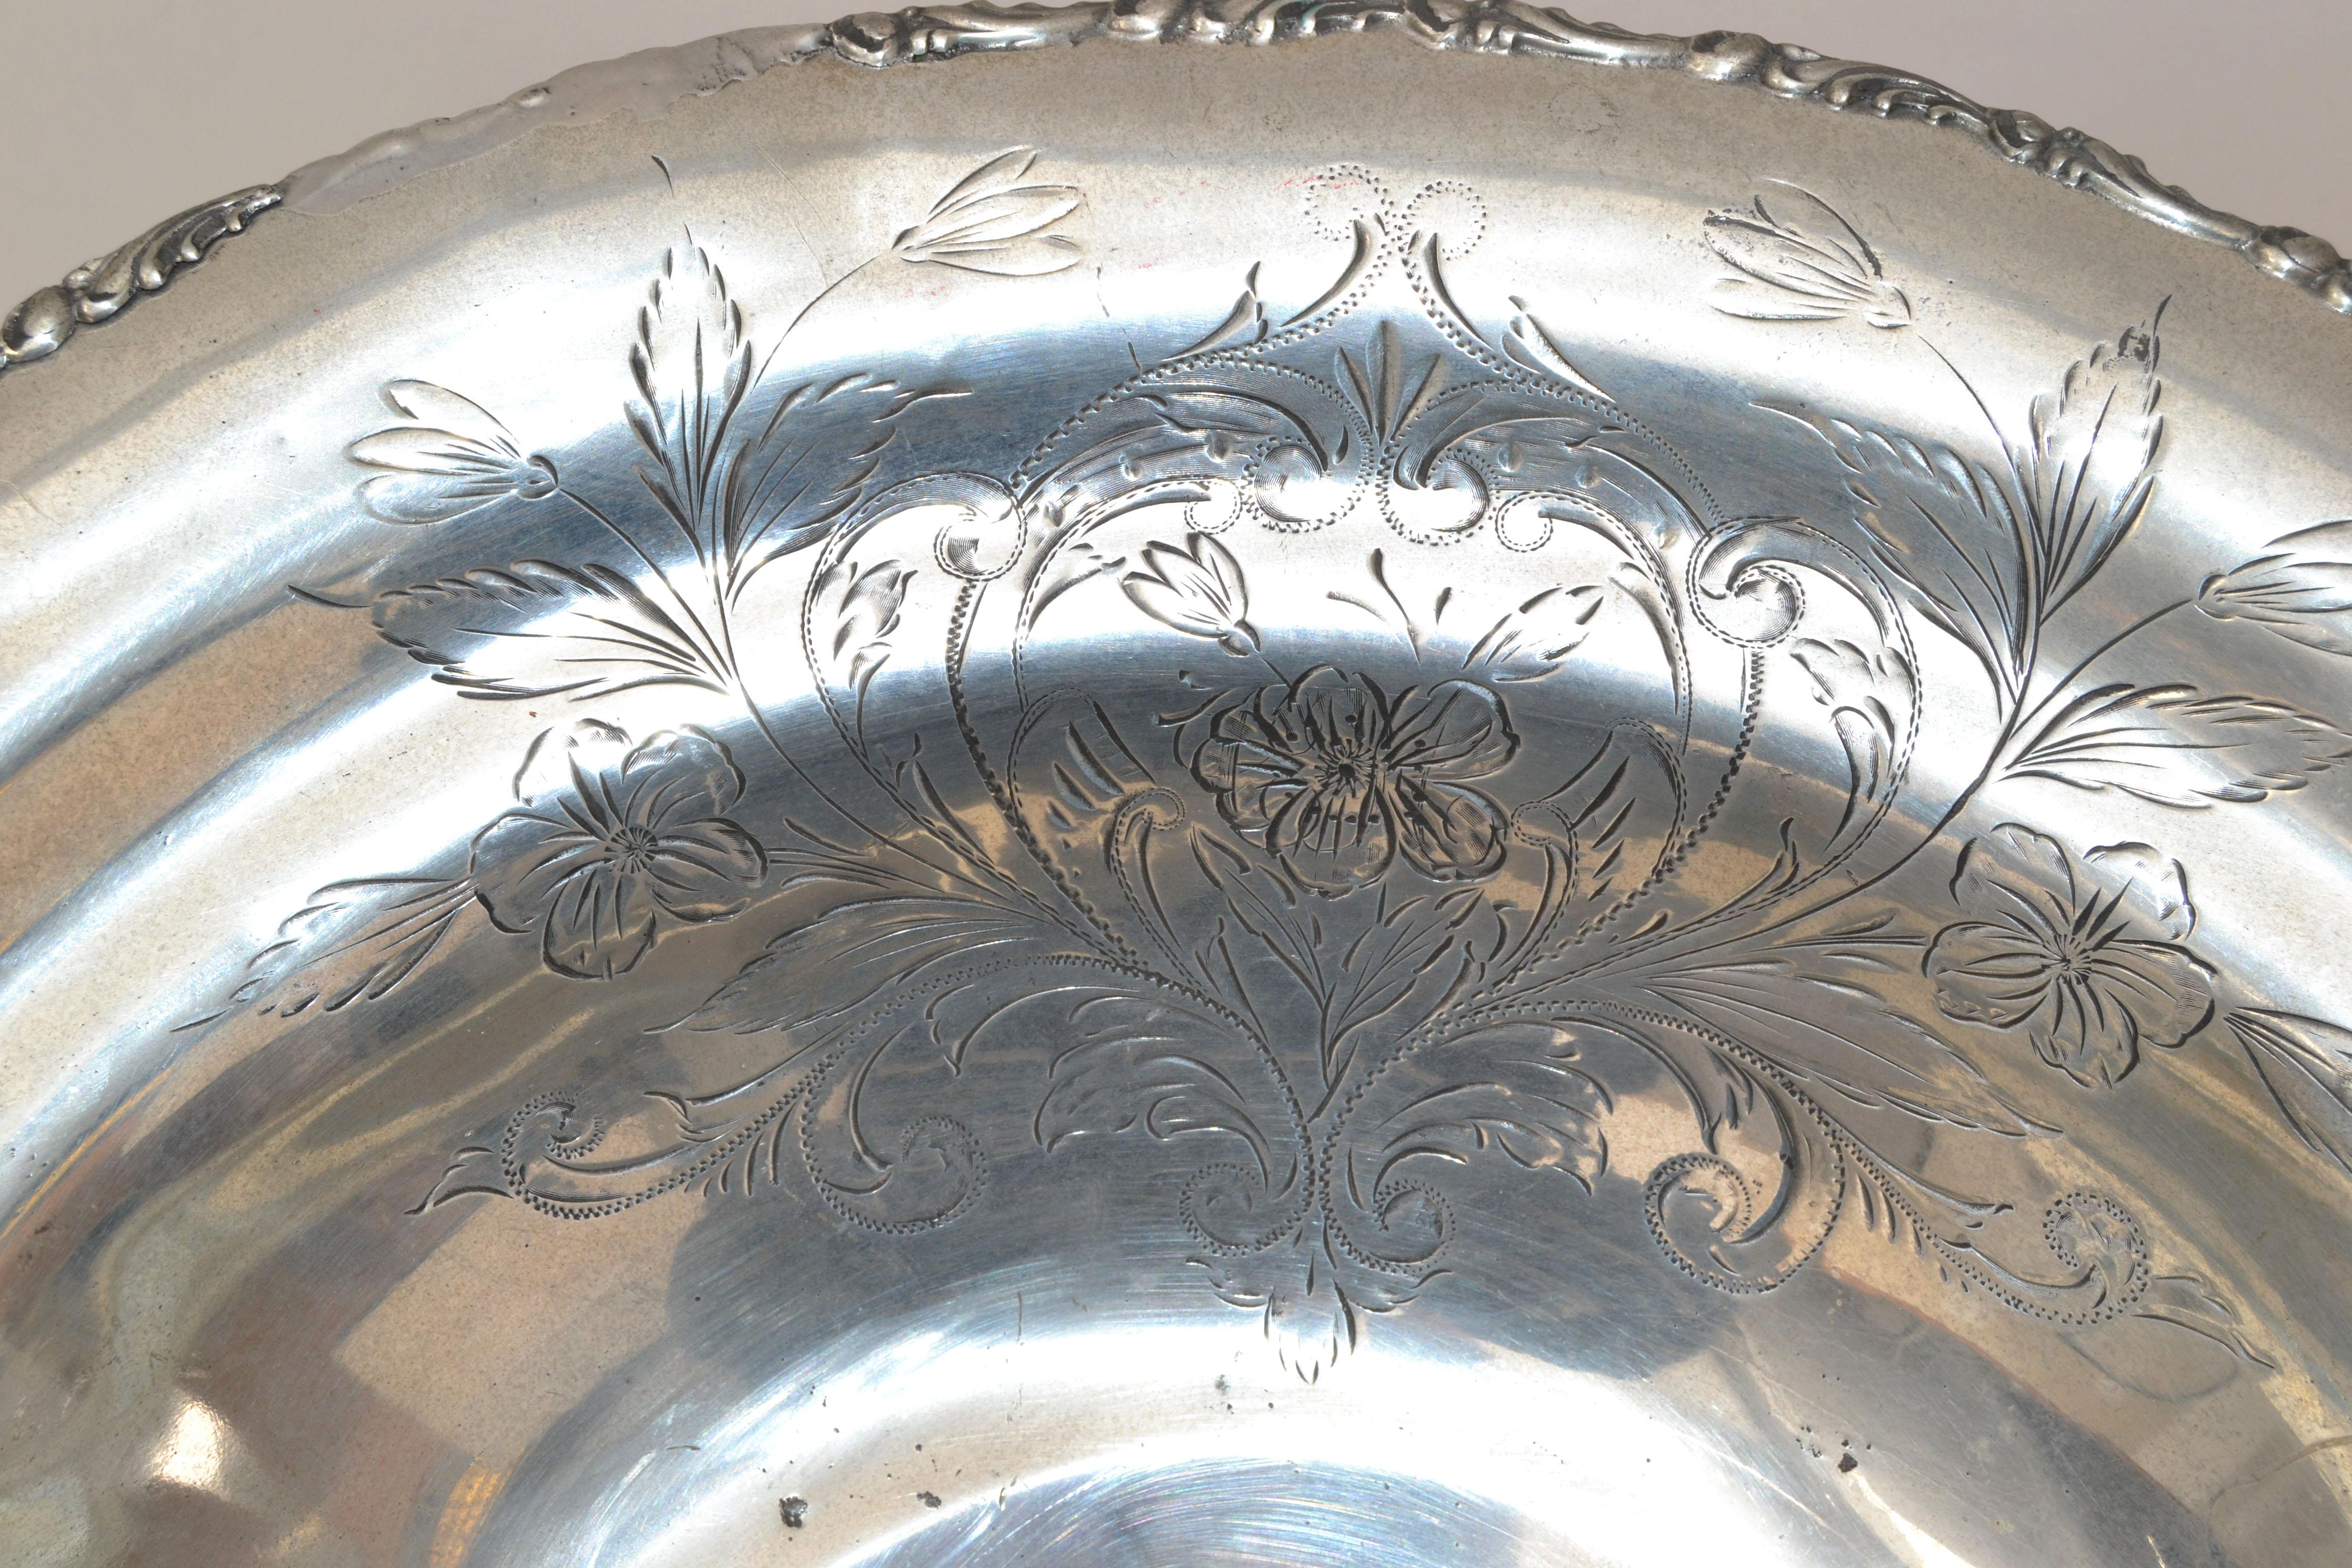 Hand-Crafted English Silver Plate Trademark Ornate Large Bowl Footed Serving Dish Punch Bowl For Sale